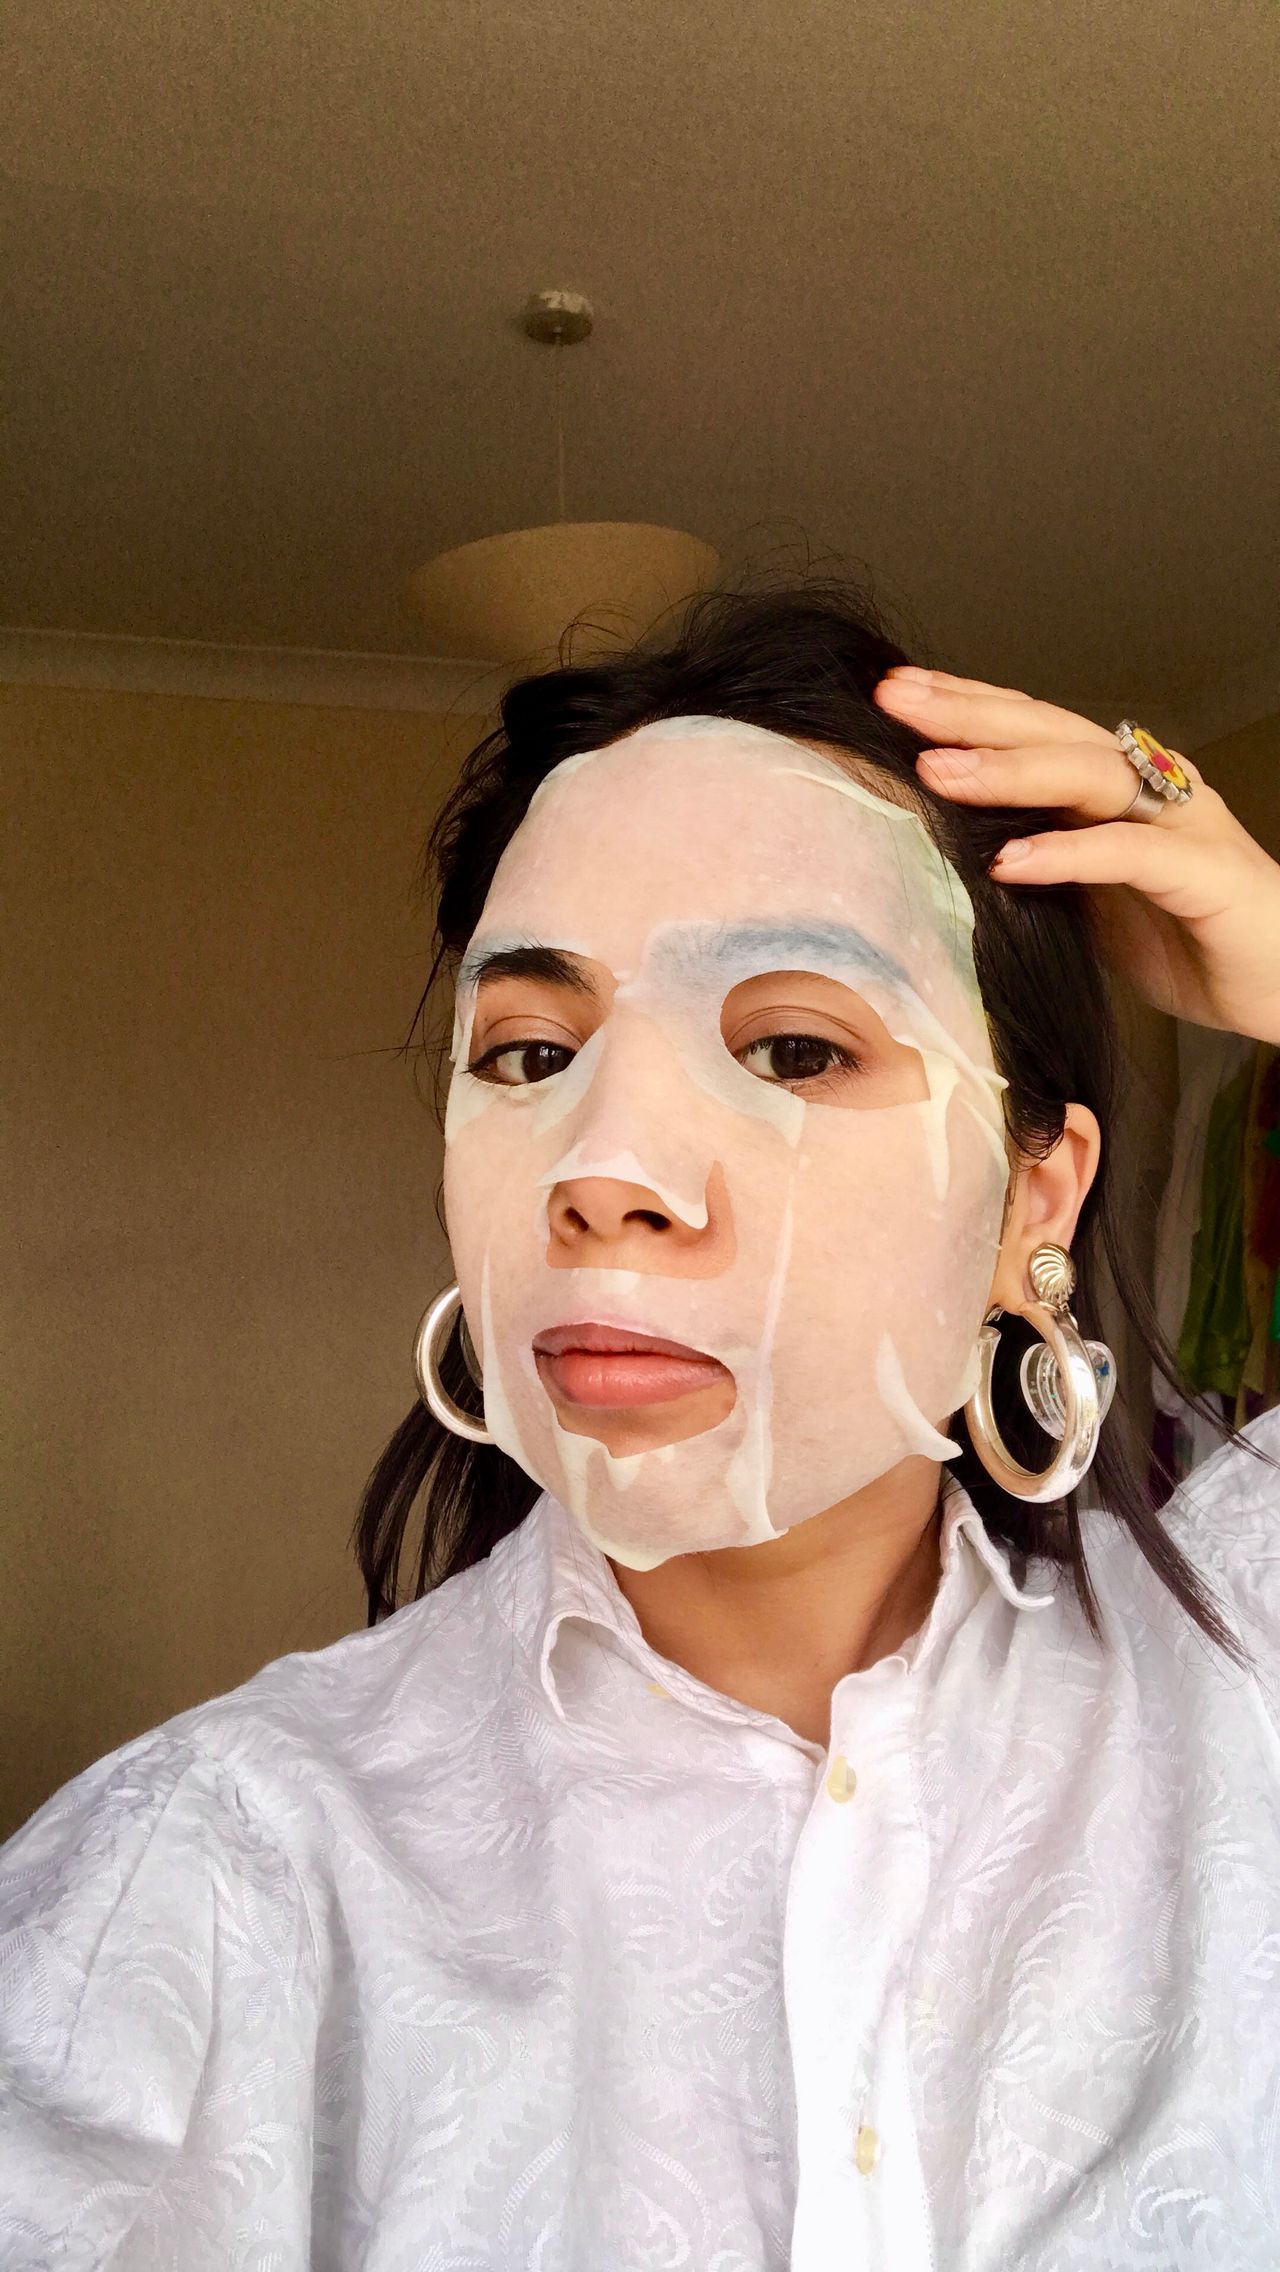 It's really hard to look sophisticated in a sheet mask, even if it's by It's Skin.